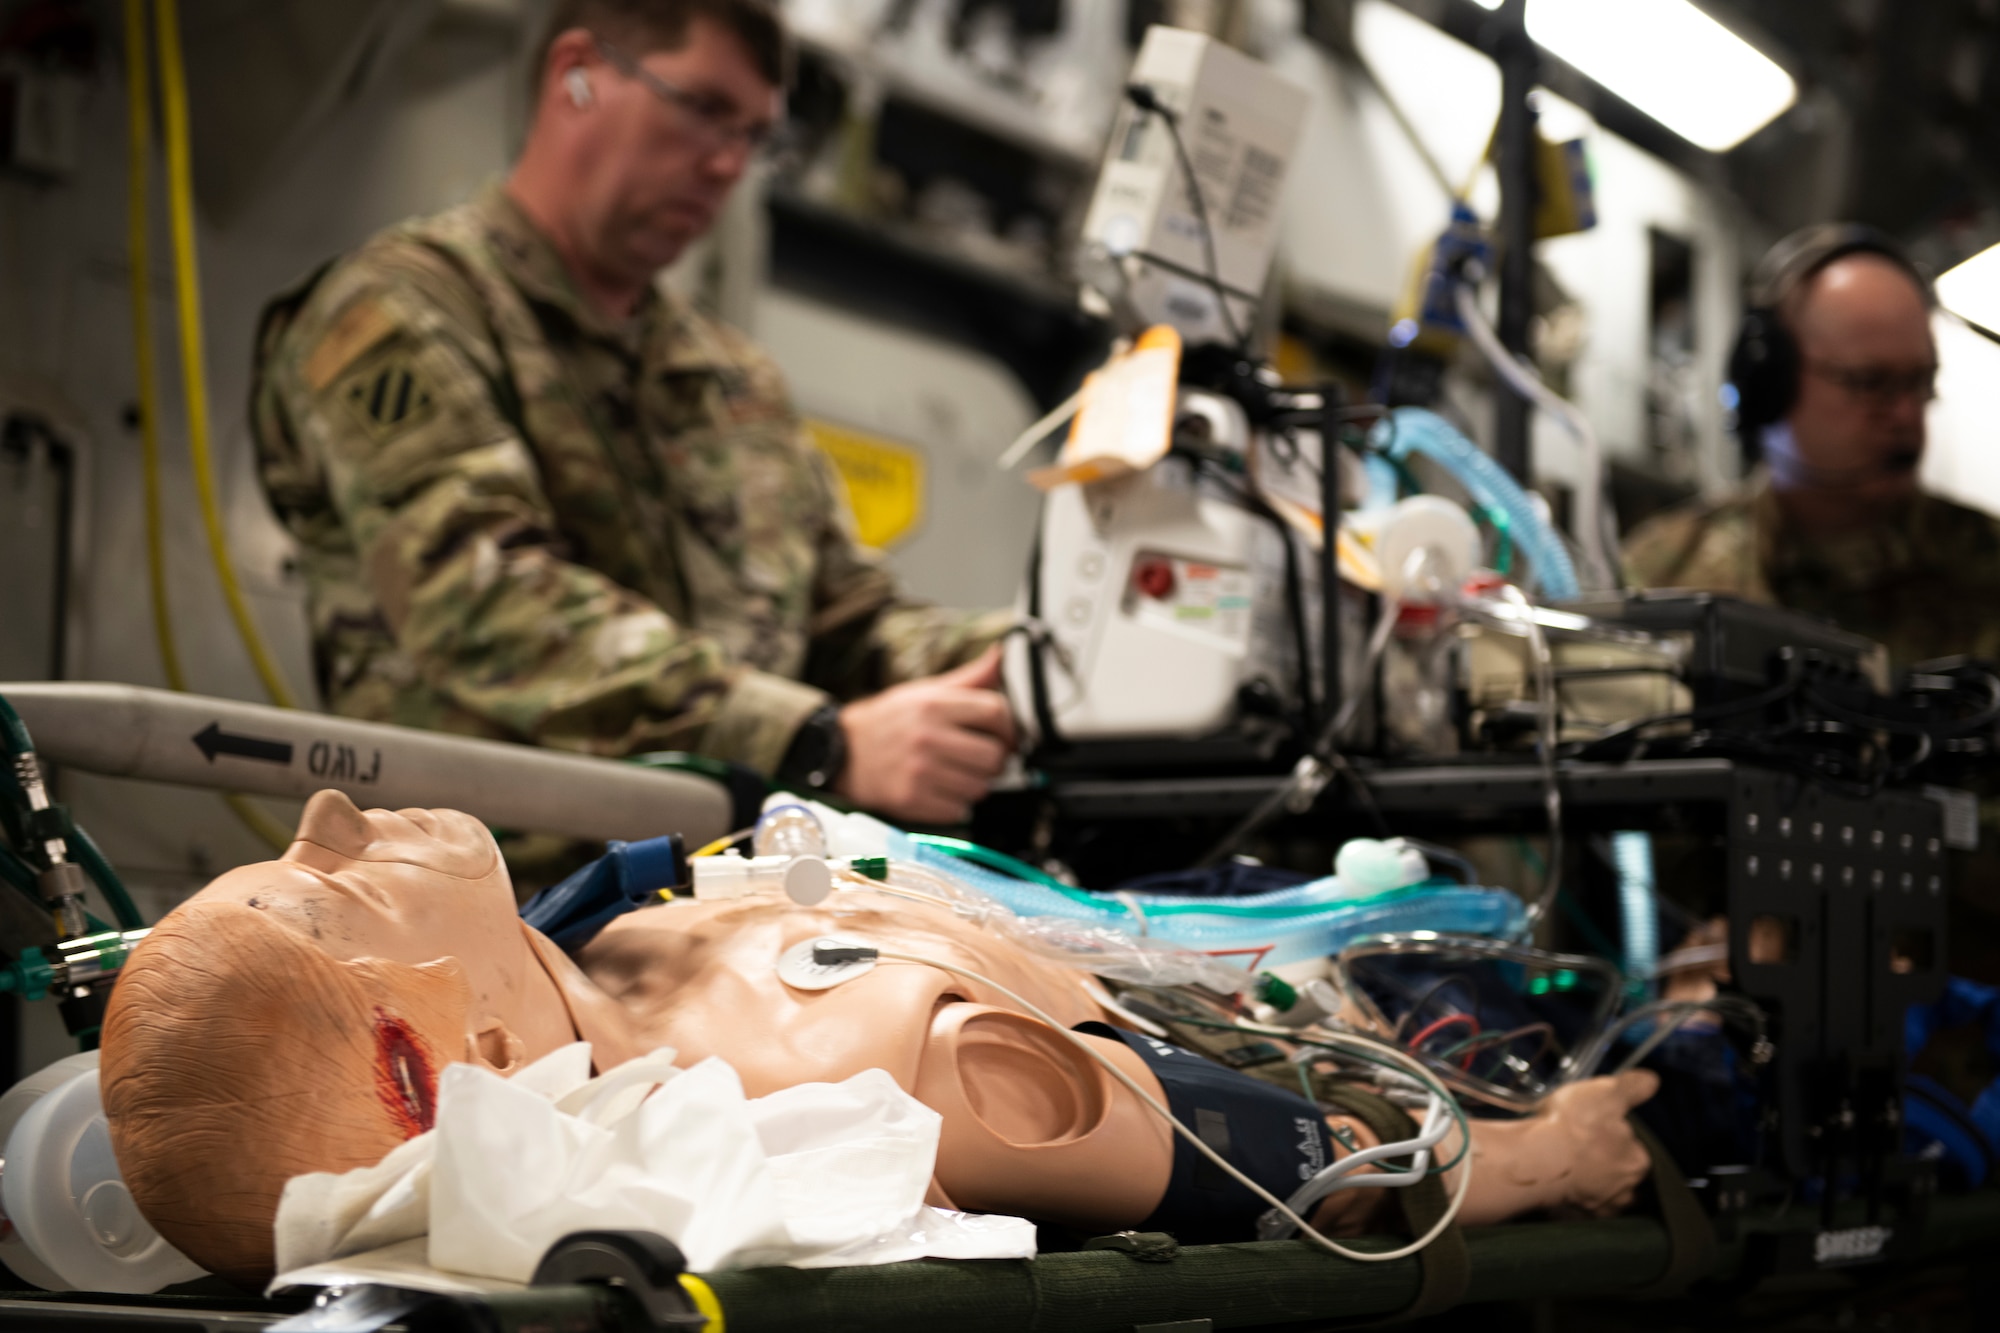 A U.S. Air Force CCATT (Critical Care Air Transport Team) crew assigned to multiple Air National Guard units provide in-flight medical care to a trauma training manikin on board of a C-17 Globemaster during Patriot South 2020 at the Gulfport Combat Readiness Training Center in Gulfport, Miss., Feb. 27, 2020.  PATRIOT is a Domestic Operations disaster-response training exercise conducted by National Guard units working with federal, state and local emergency management agencies and first responders. (U.S. Air National Guard photo by Technical Sgt. L. Roland Sturm)